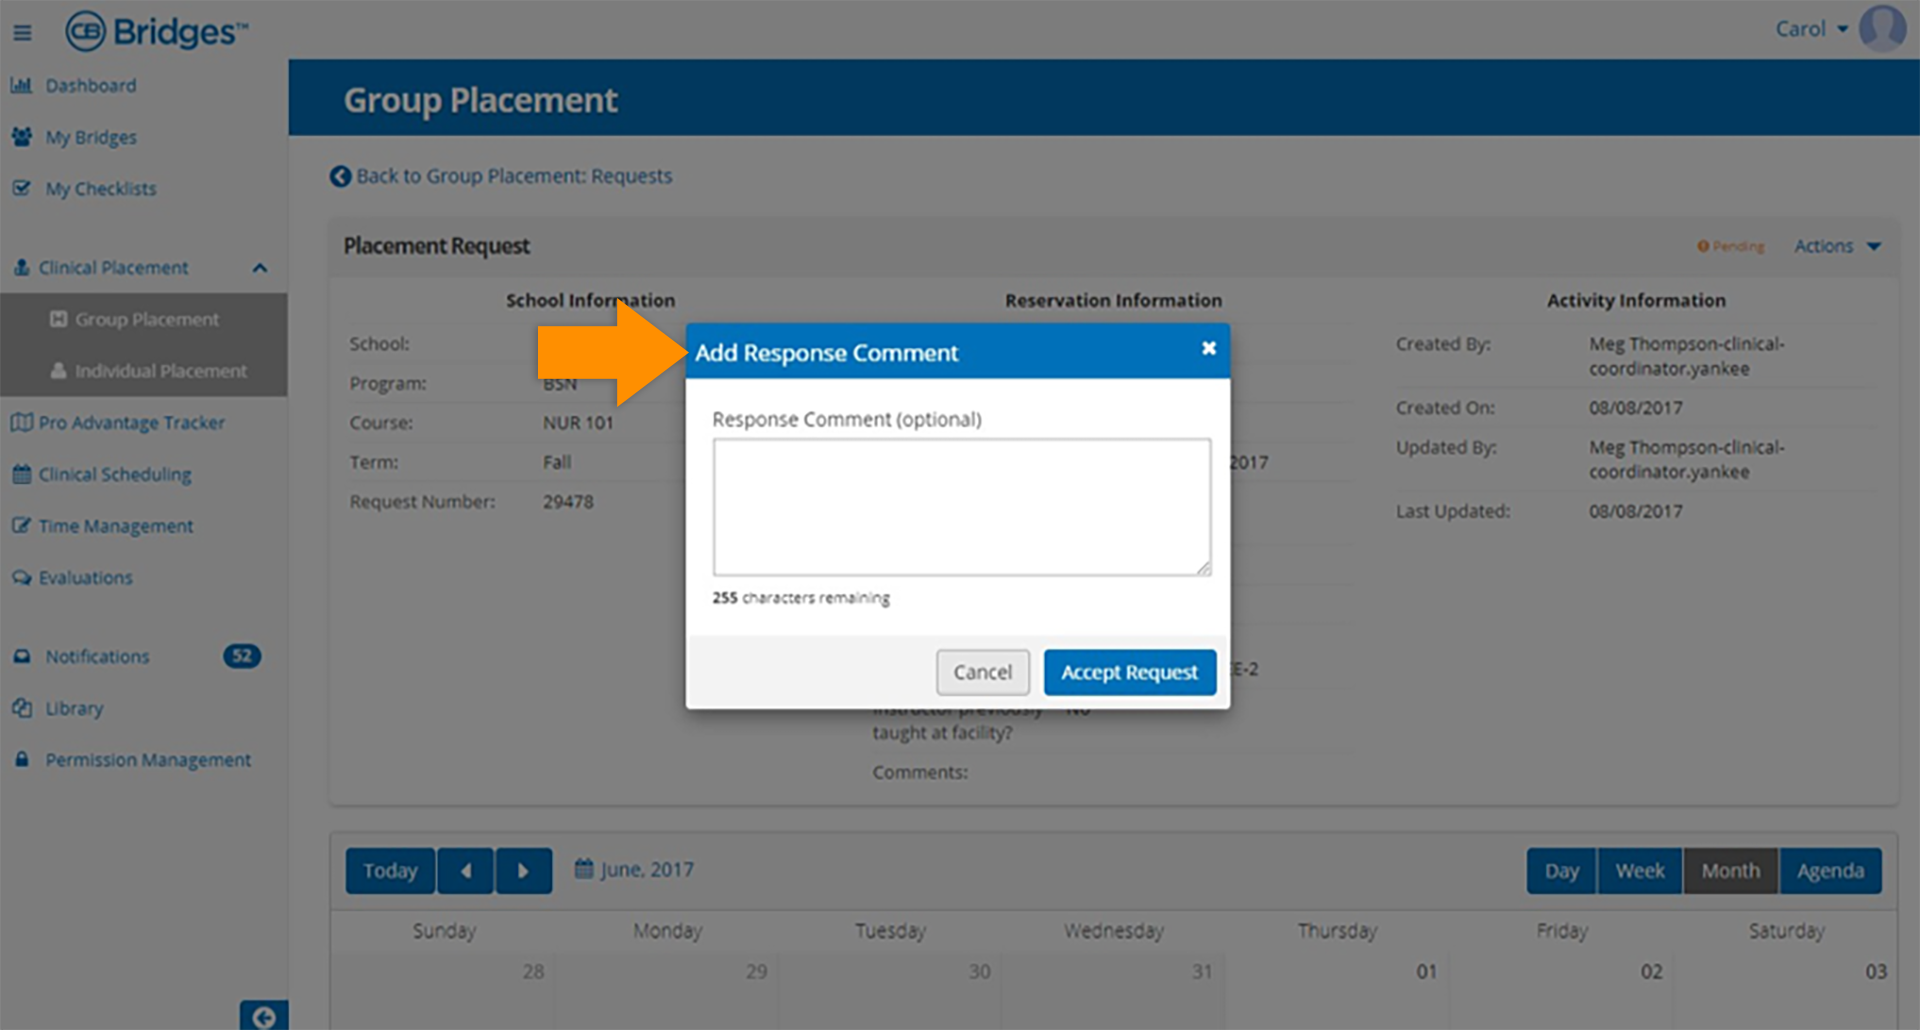 CB Bridges™ Clinical Placement Ability for Facilities to add a comment when accepting or declining a group placement request—Pop-up Window for Adding a Response Comment while accepting a request